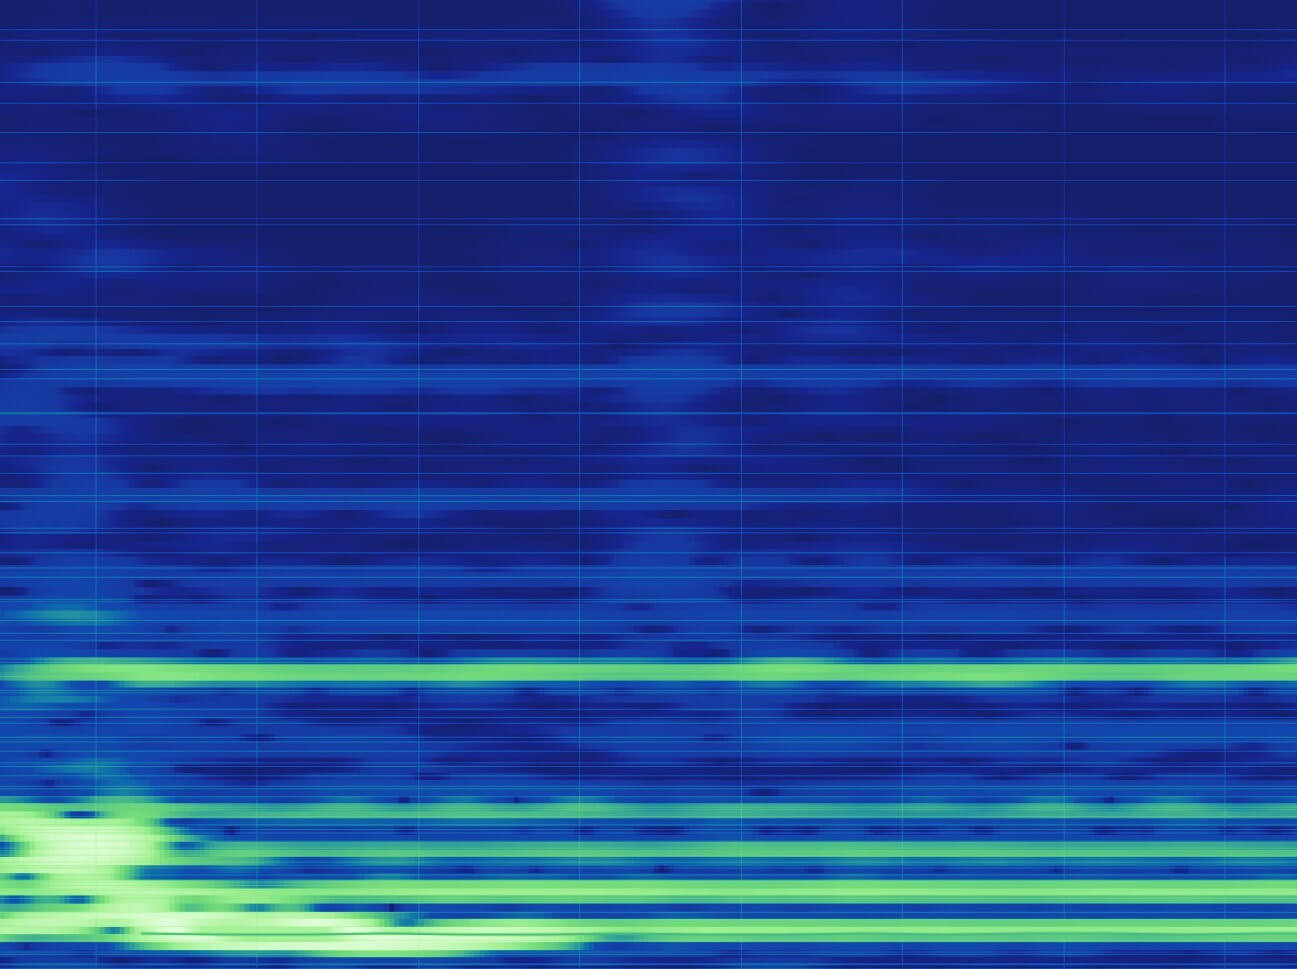 Here is the spectogram image representing the frequency content of the lossless file.

Even at a glance, we can see that there is more resolution in the spectrogram image alone compared to the lossy file. 